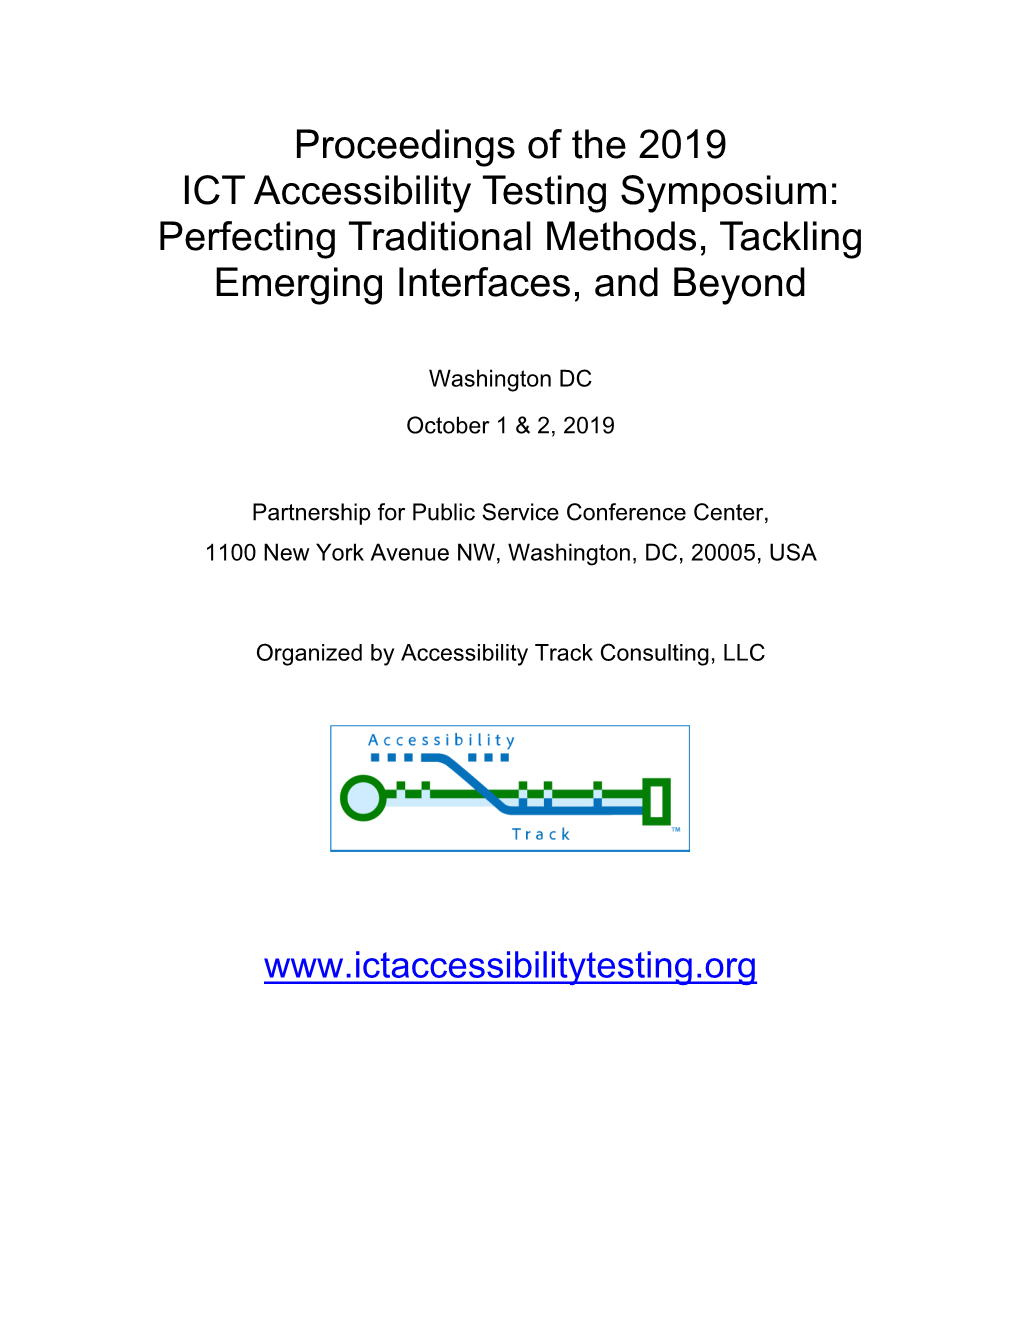 Proceedings of the 2019 ICT Accessibility Testing Symposium: Perfecting Traditional Methods, Tackling Emerging Interfaces, and Beyond